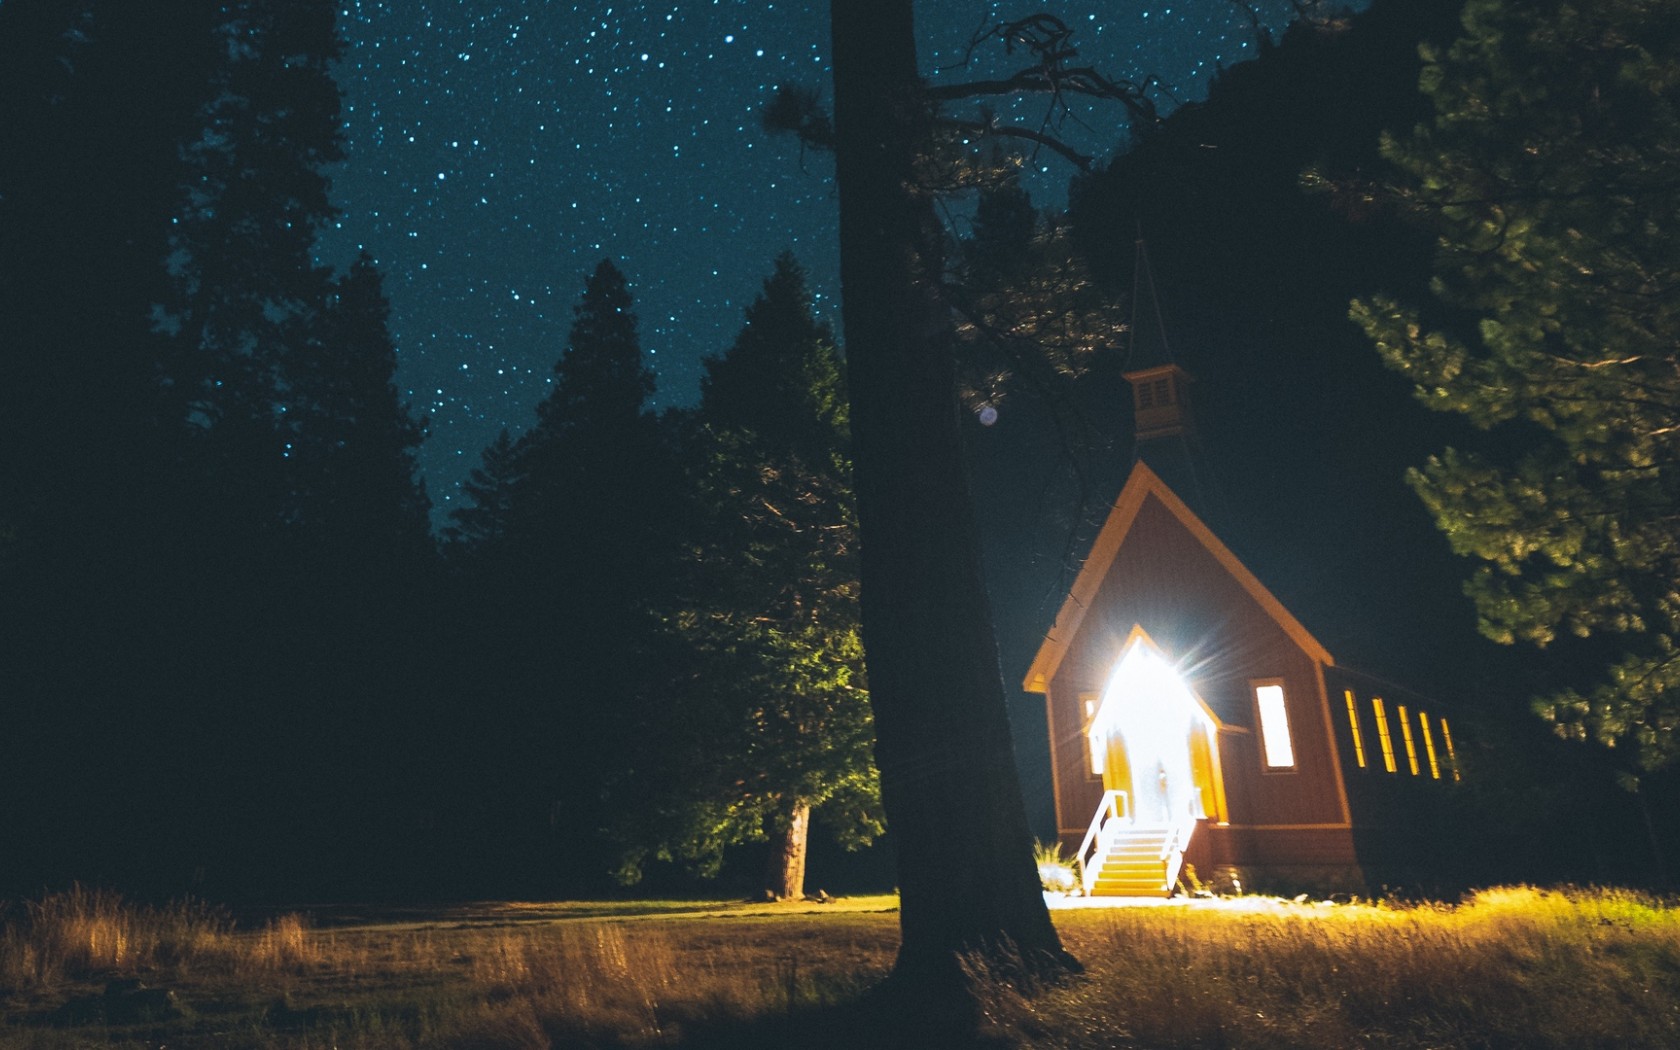 Night at a forest house HD Wallpaper